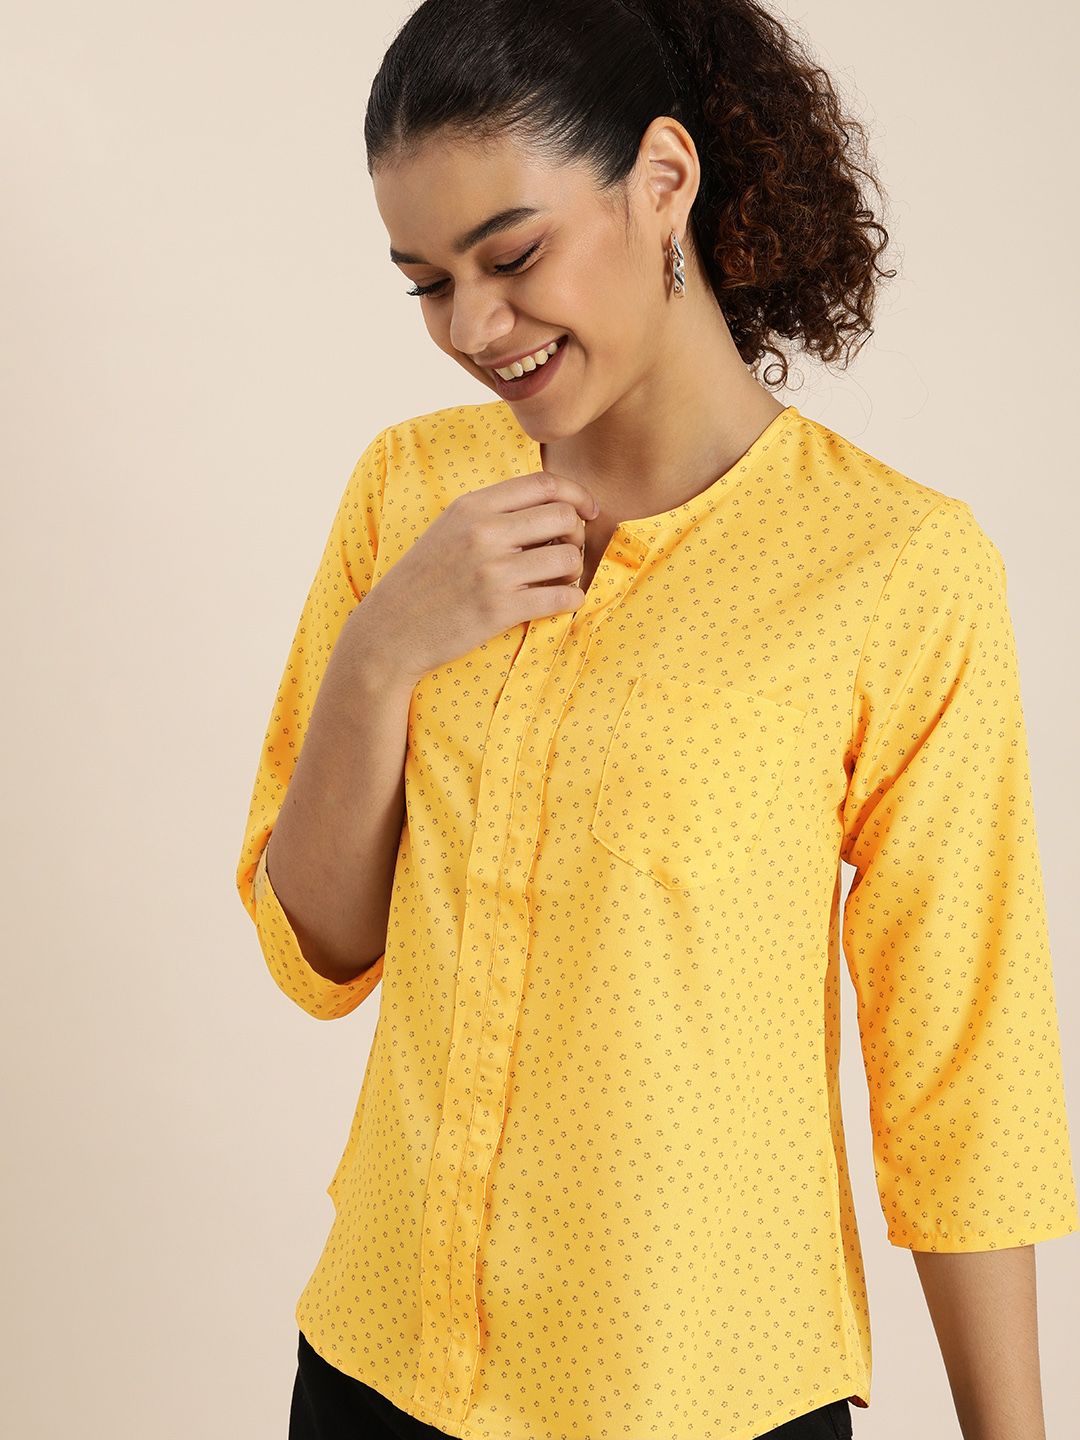 encore by INVICTUS Yellow Geometric Print Round Neck Pocket Detailing Regular Top Price in India